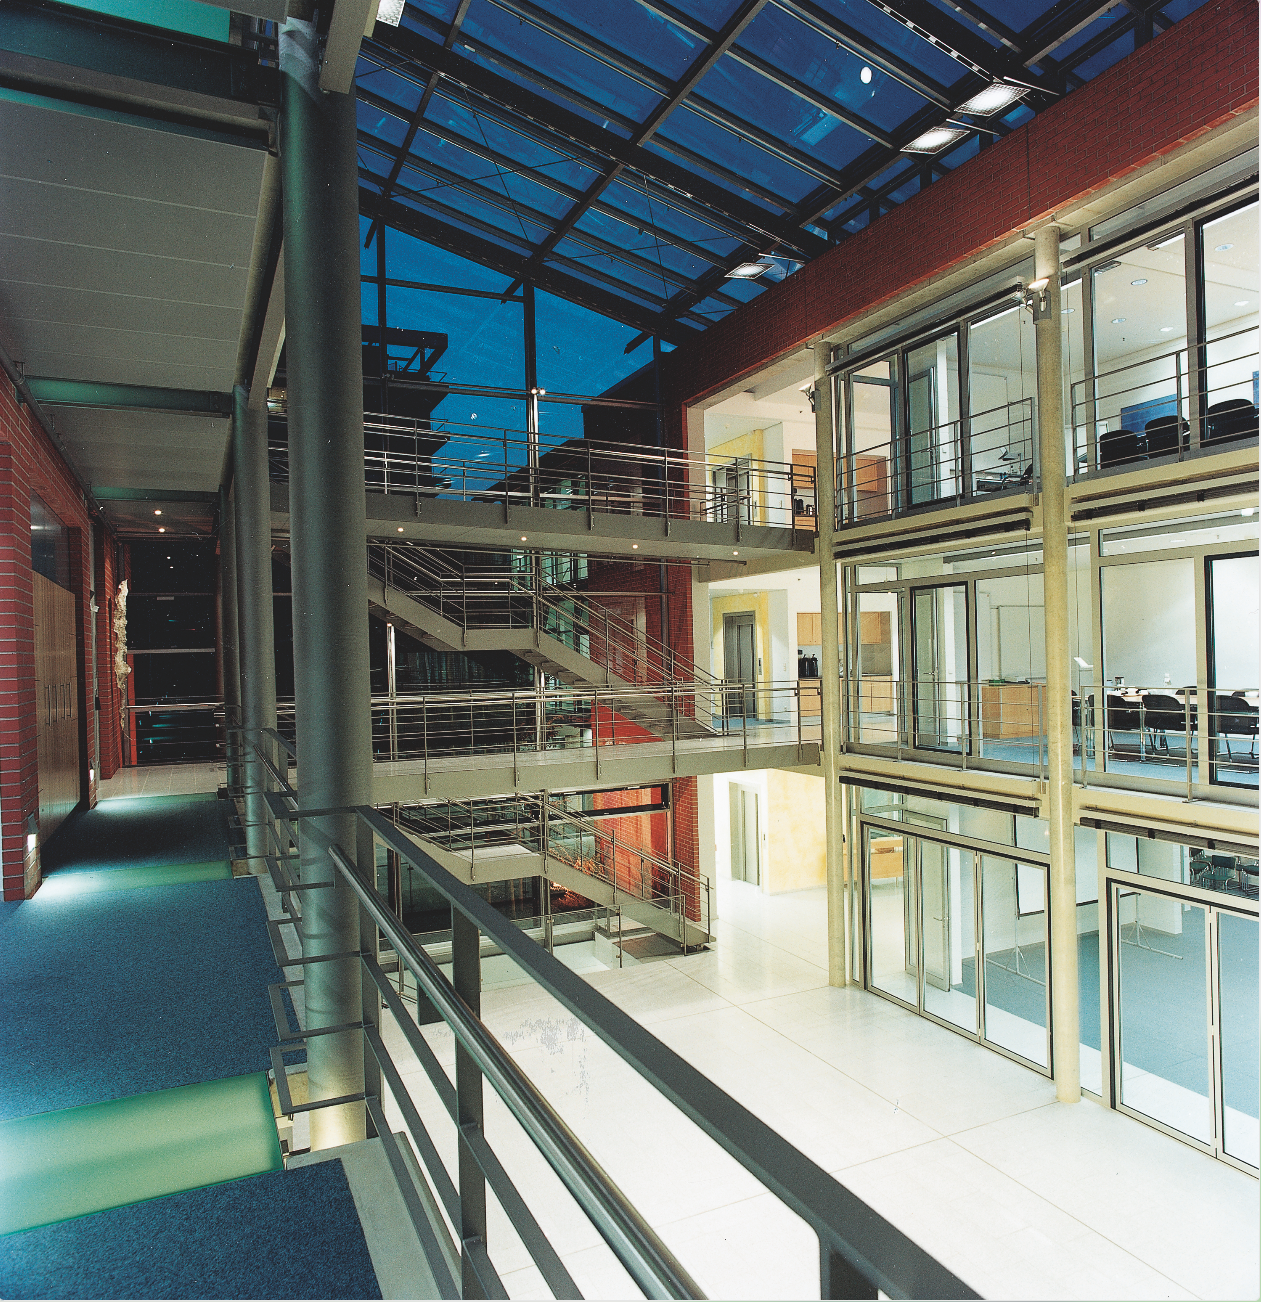 Interior view of the biotechnology center, inaugurated in 1999, with R&D laboratories